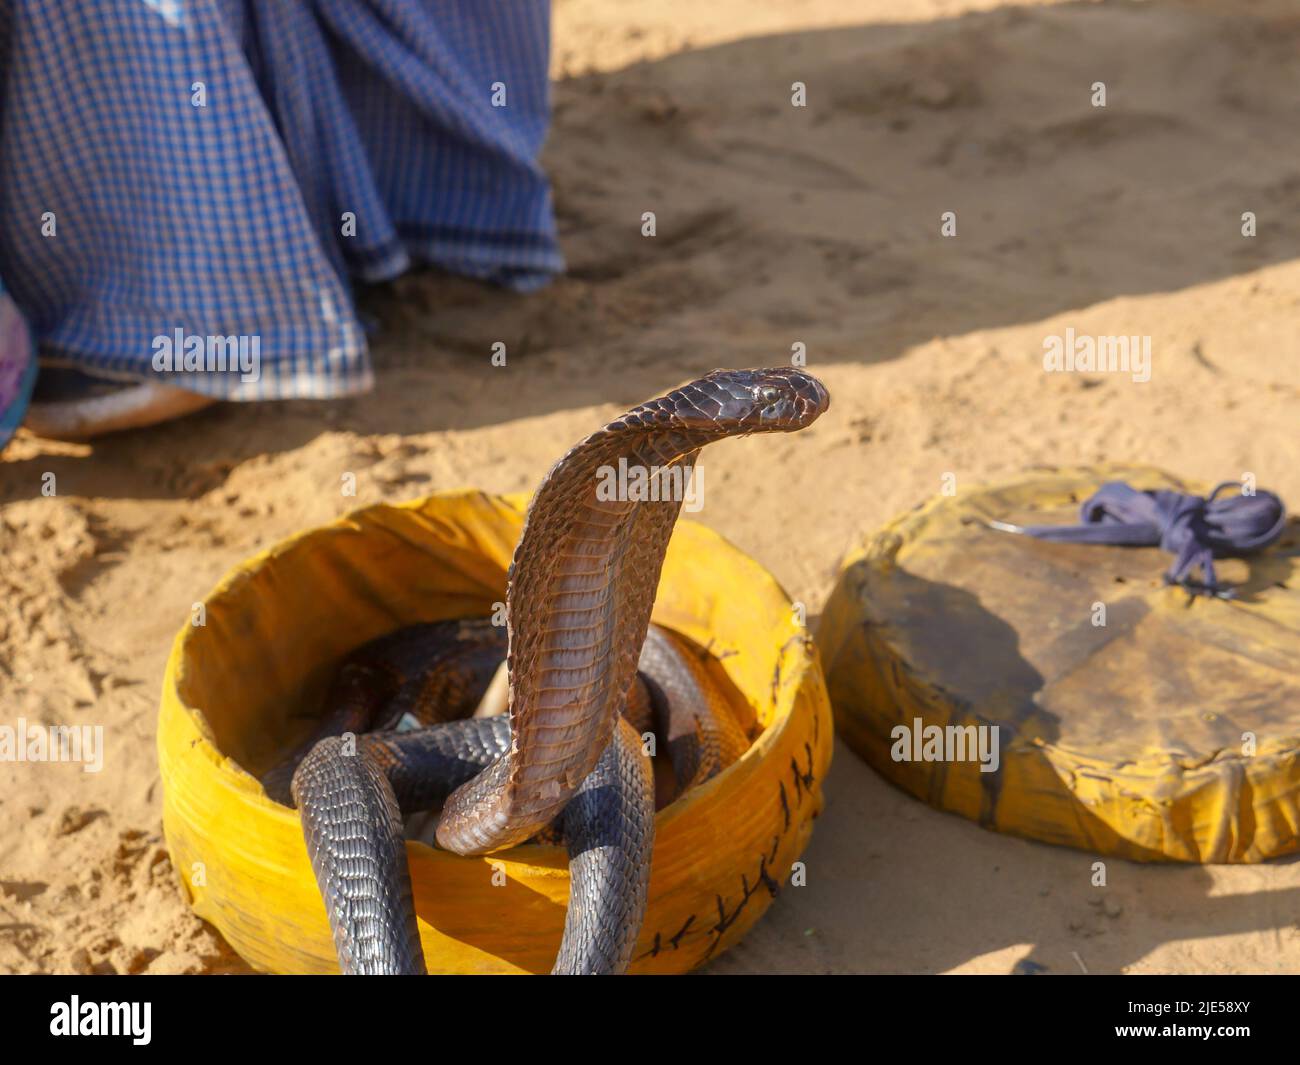 Cobra Snake showing hood, closeup picture, placed in a basket Stock Photo